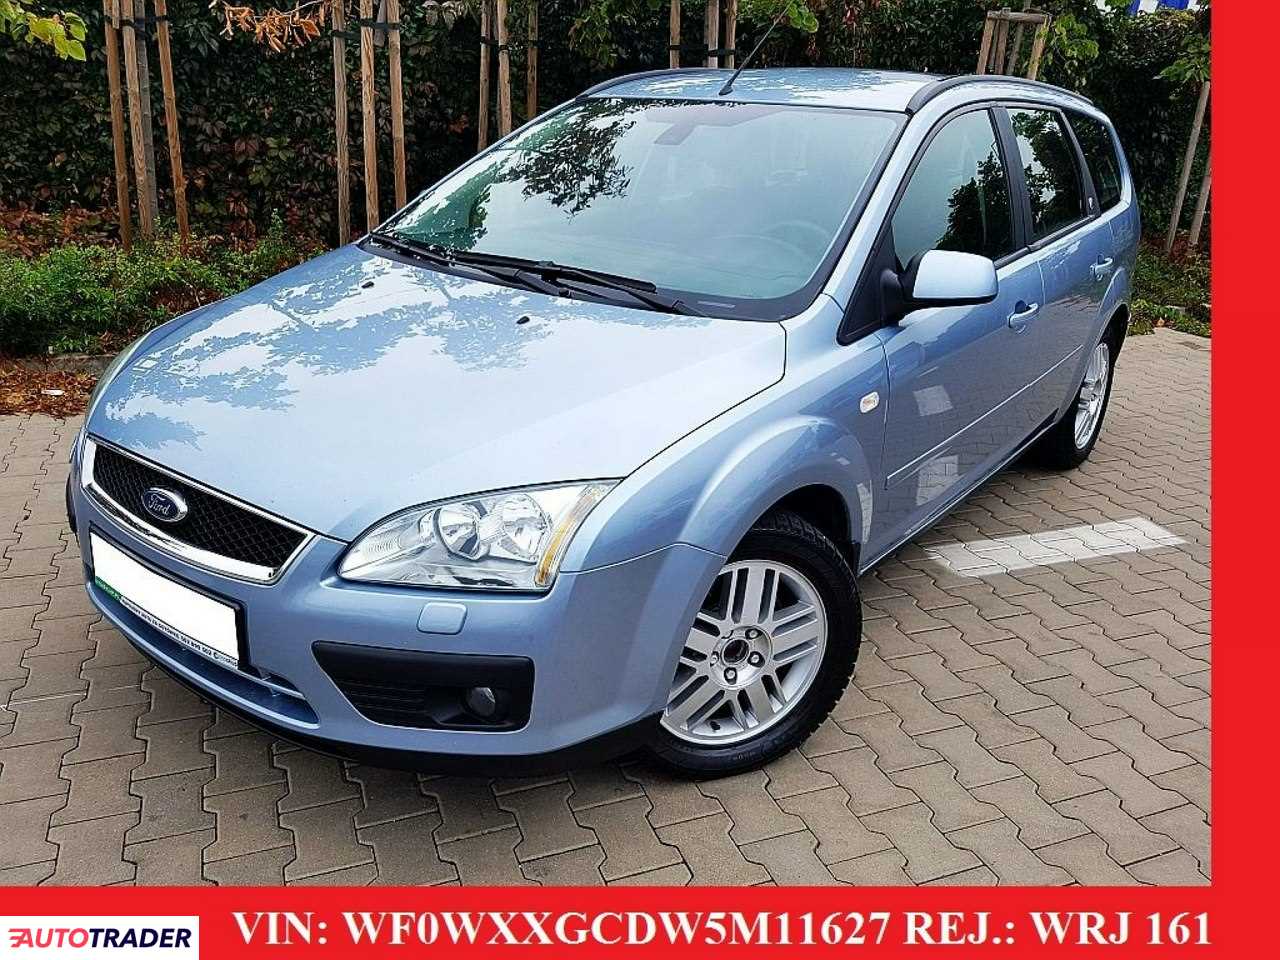 Ford Focus 2005 2 145 KM